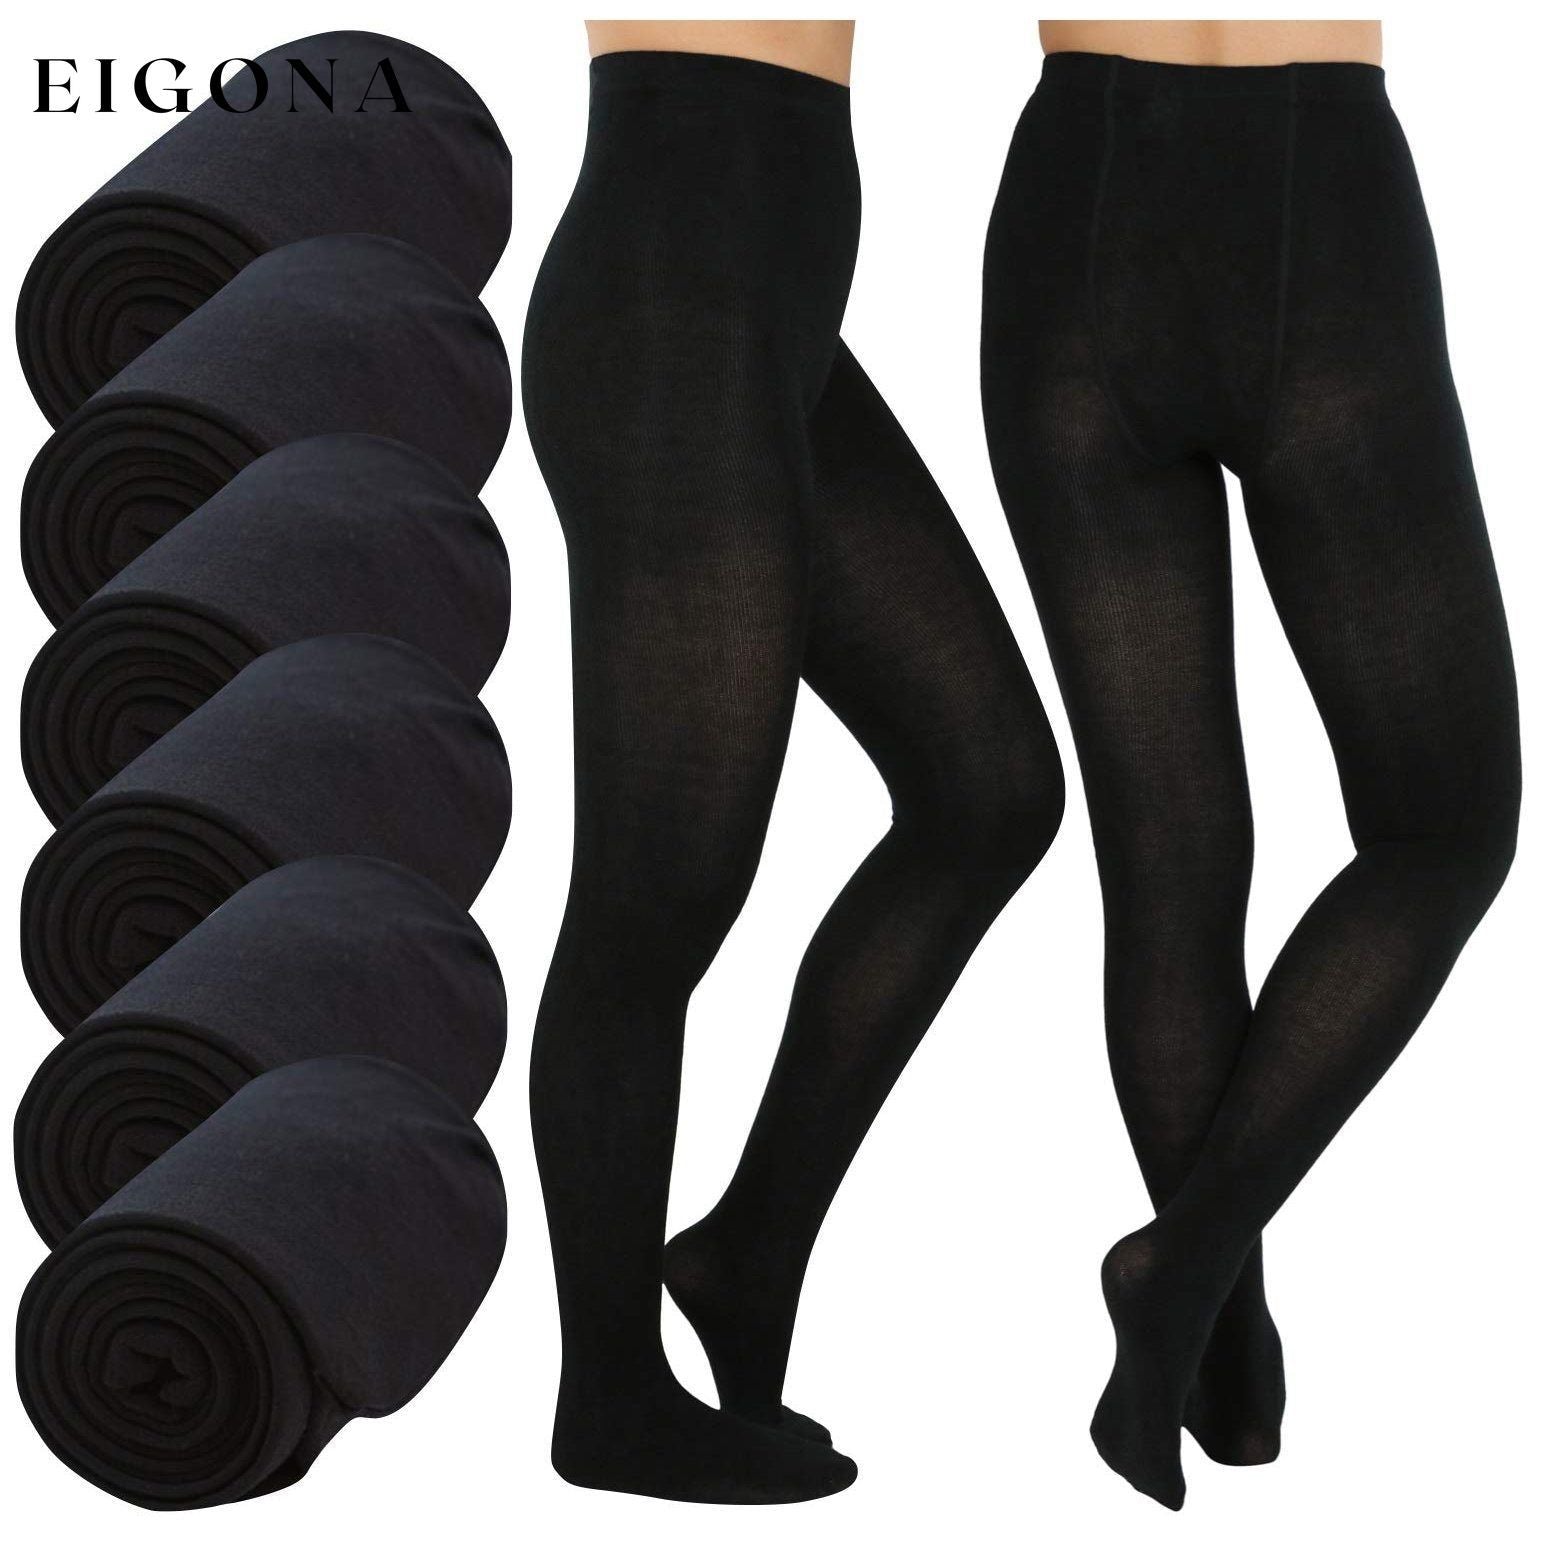 6-Pack: Women's Footed Winter Tights __stock:100 bottoms refund_fee:1800